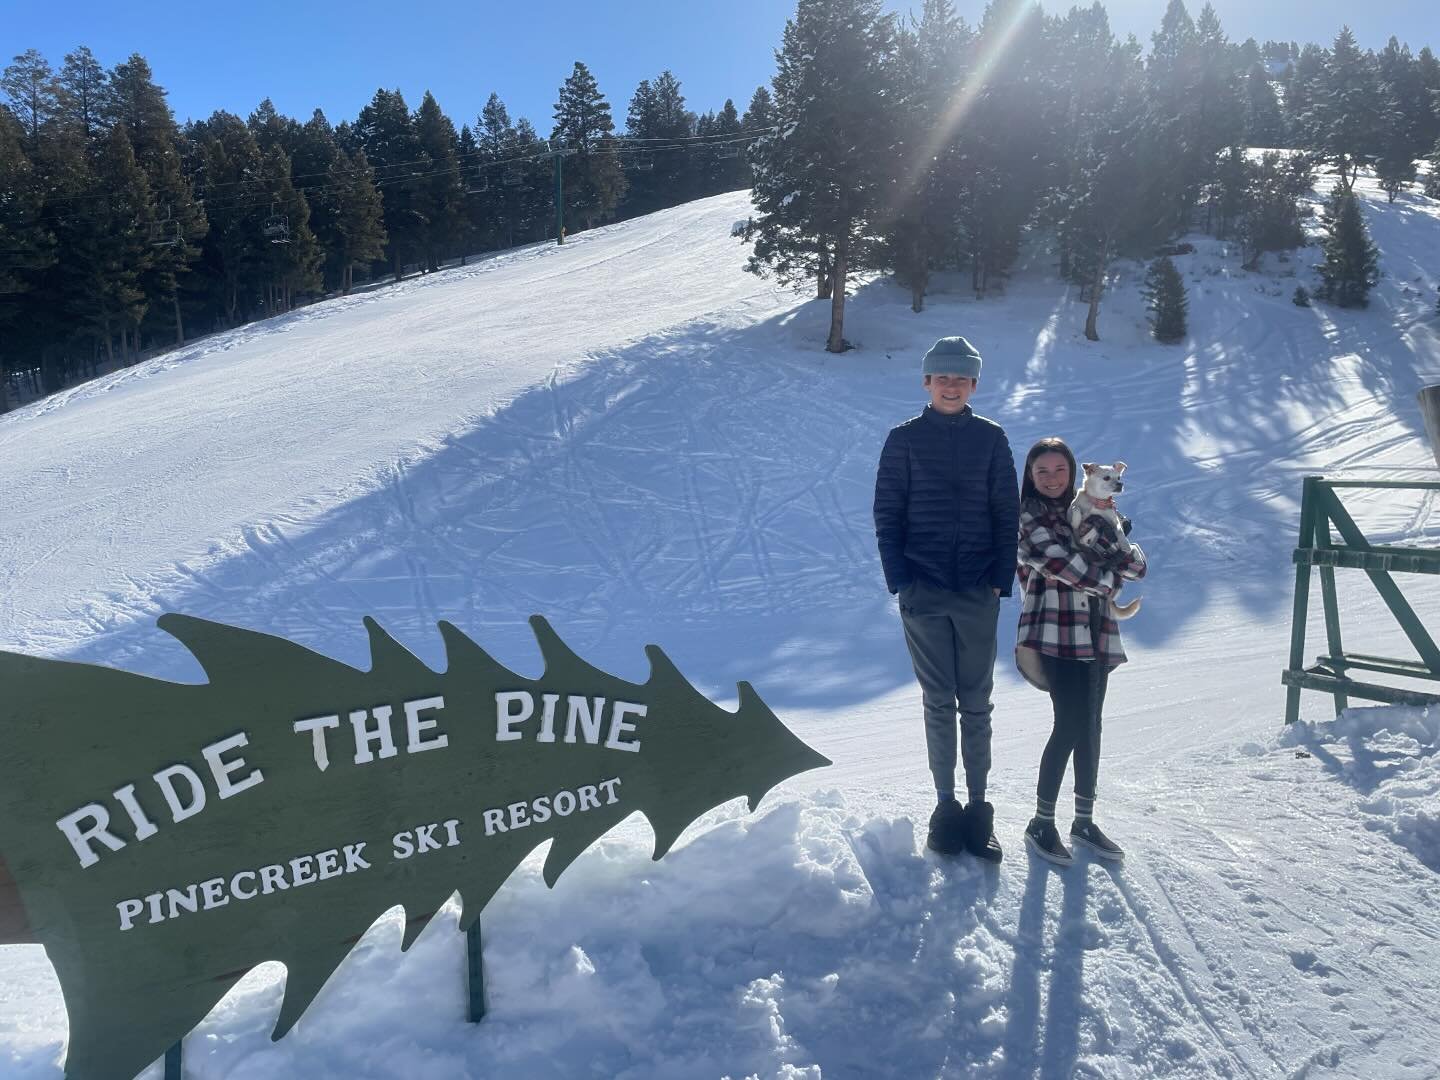 We had a great time @pine.creek.ski.resort  Such a cool resort and vibe.  We&rsquo;ll be back to #ridethepine